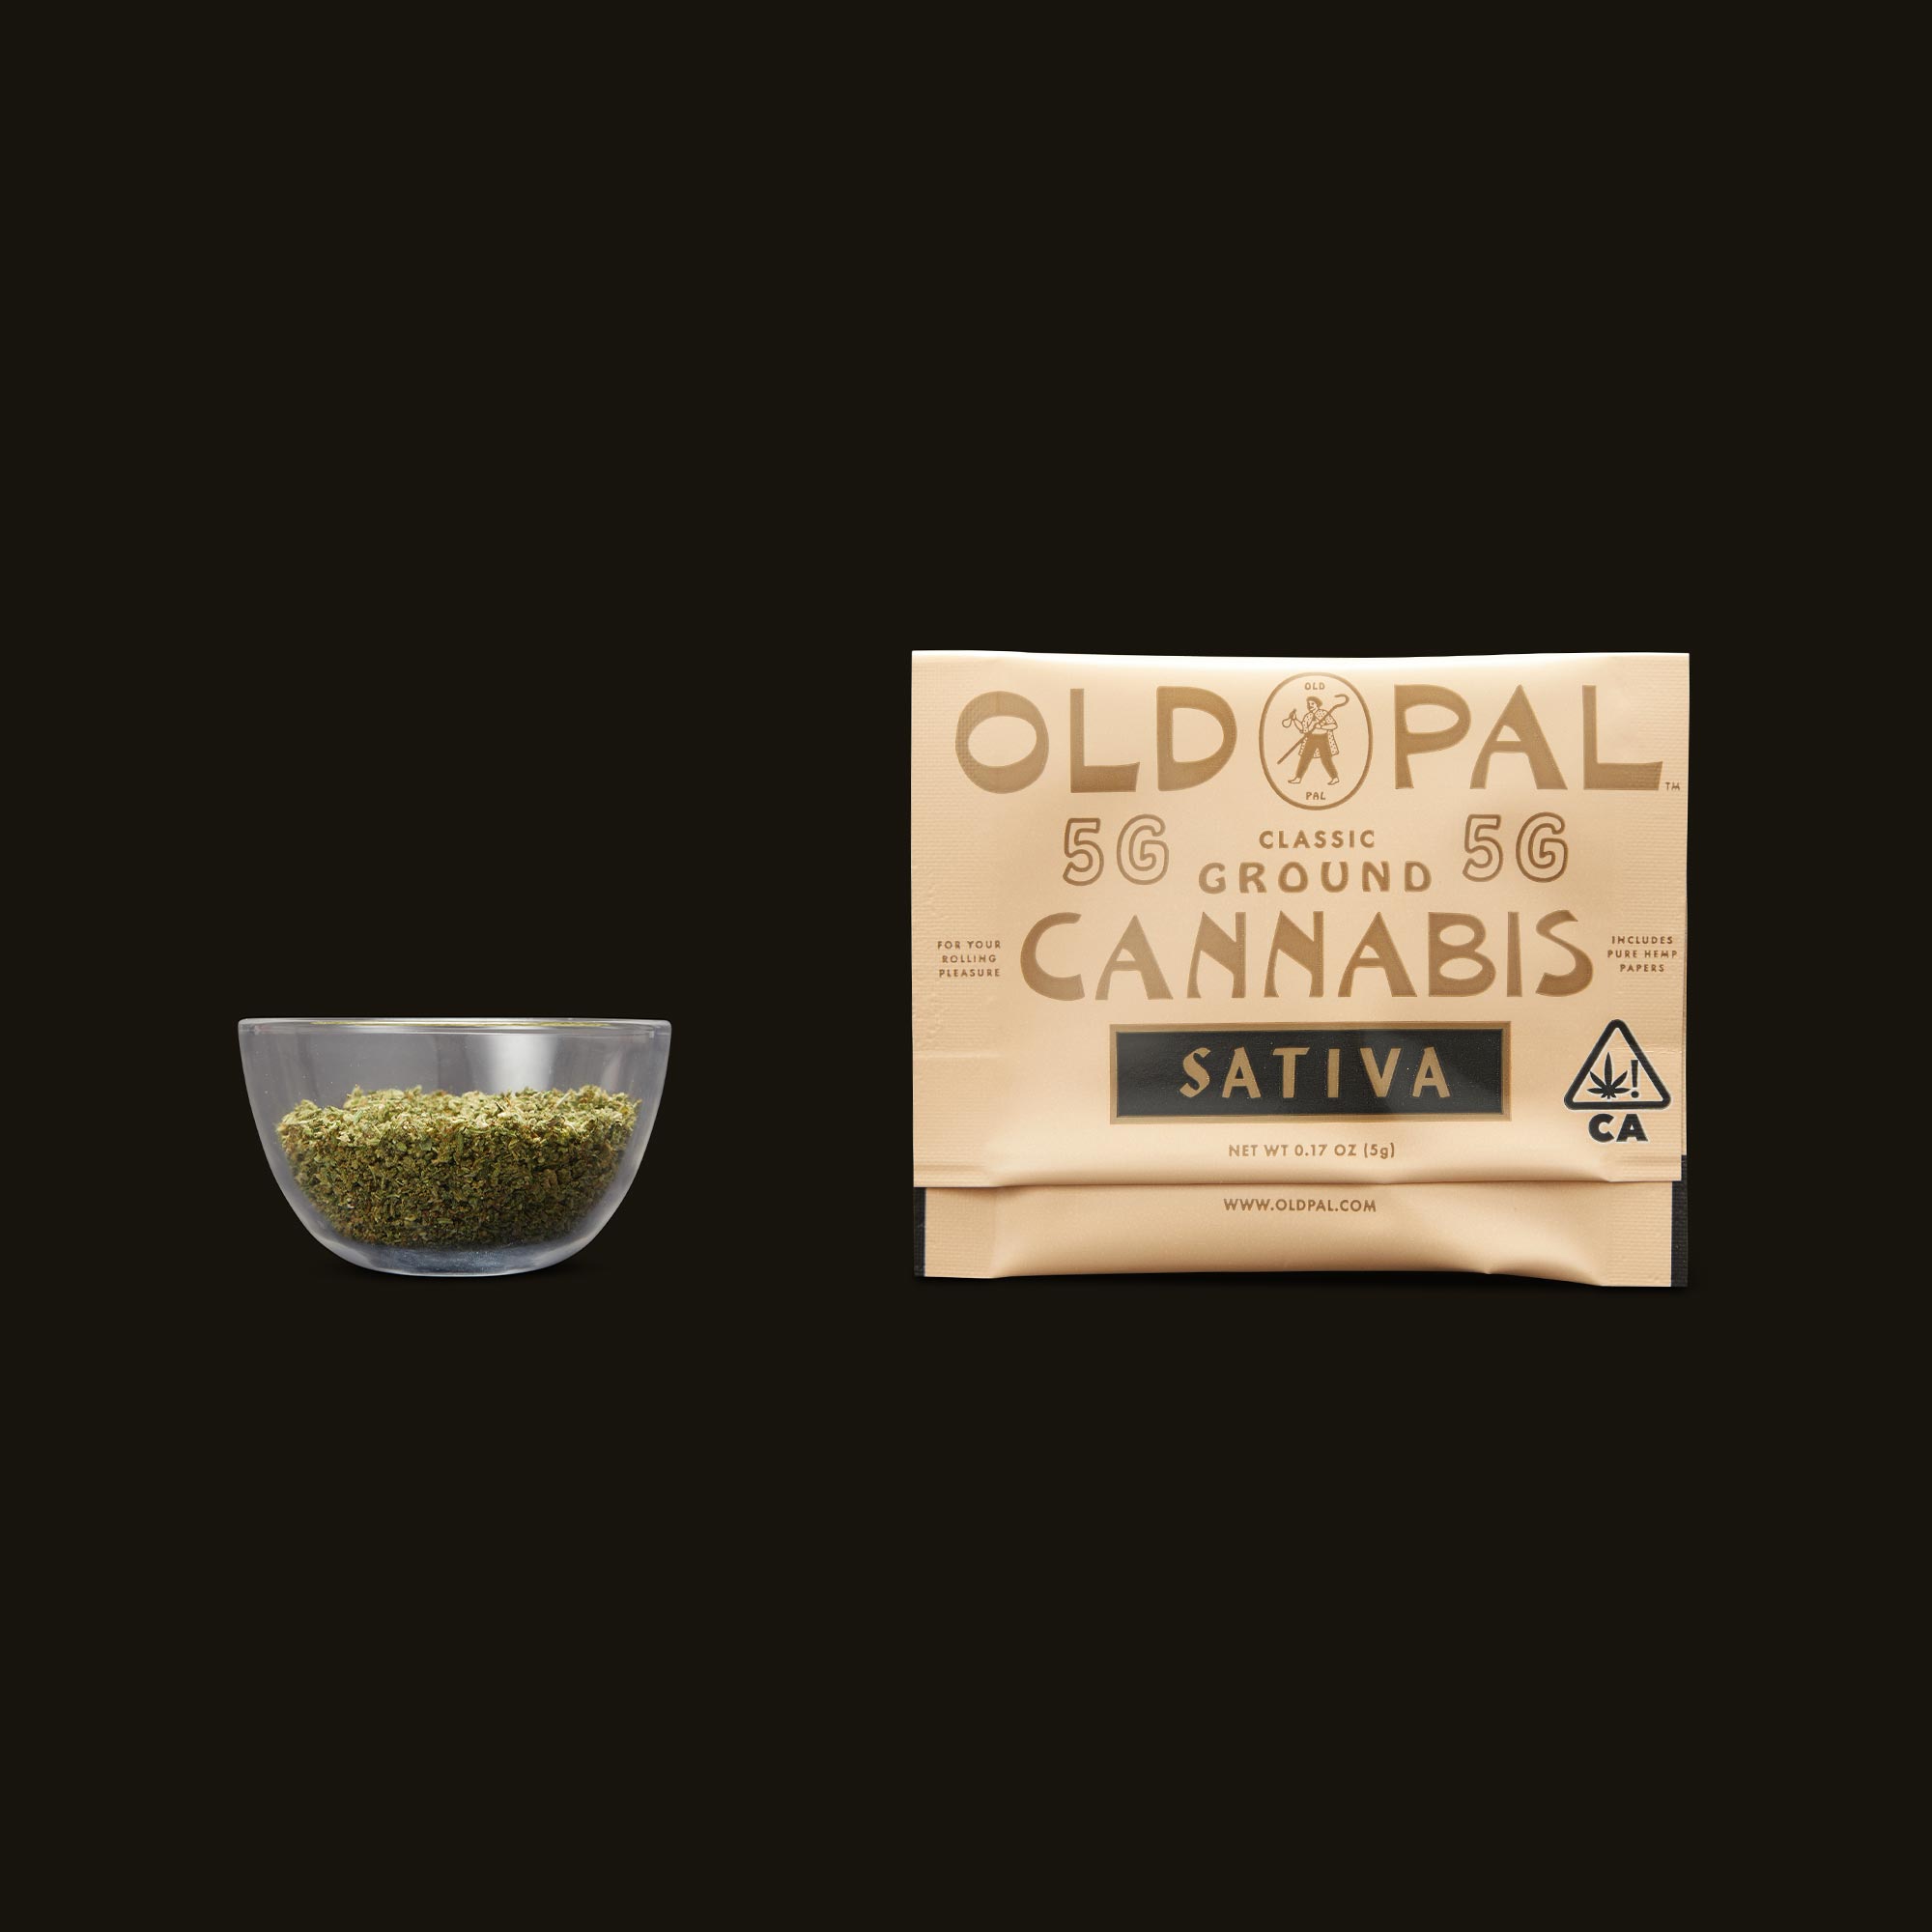 Old-Pal-Ready-to-Roll-Sativa-5g4542-1853627